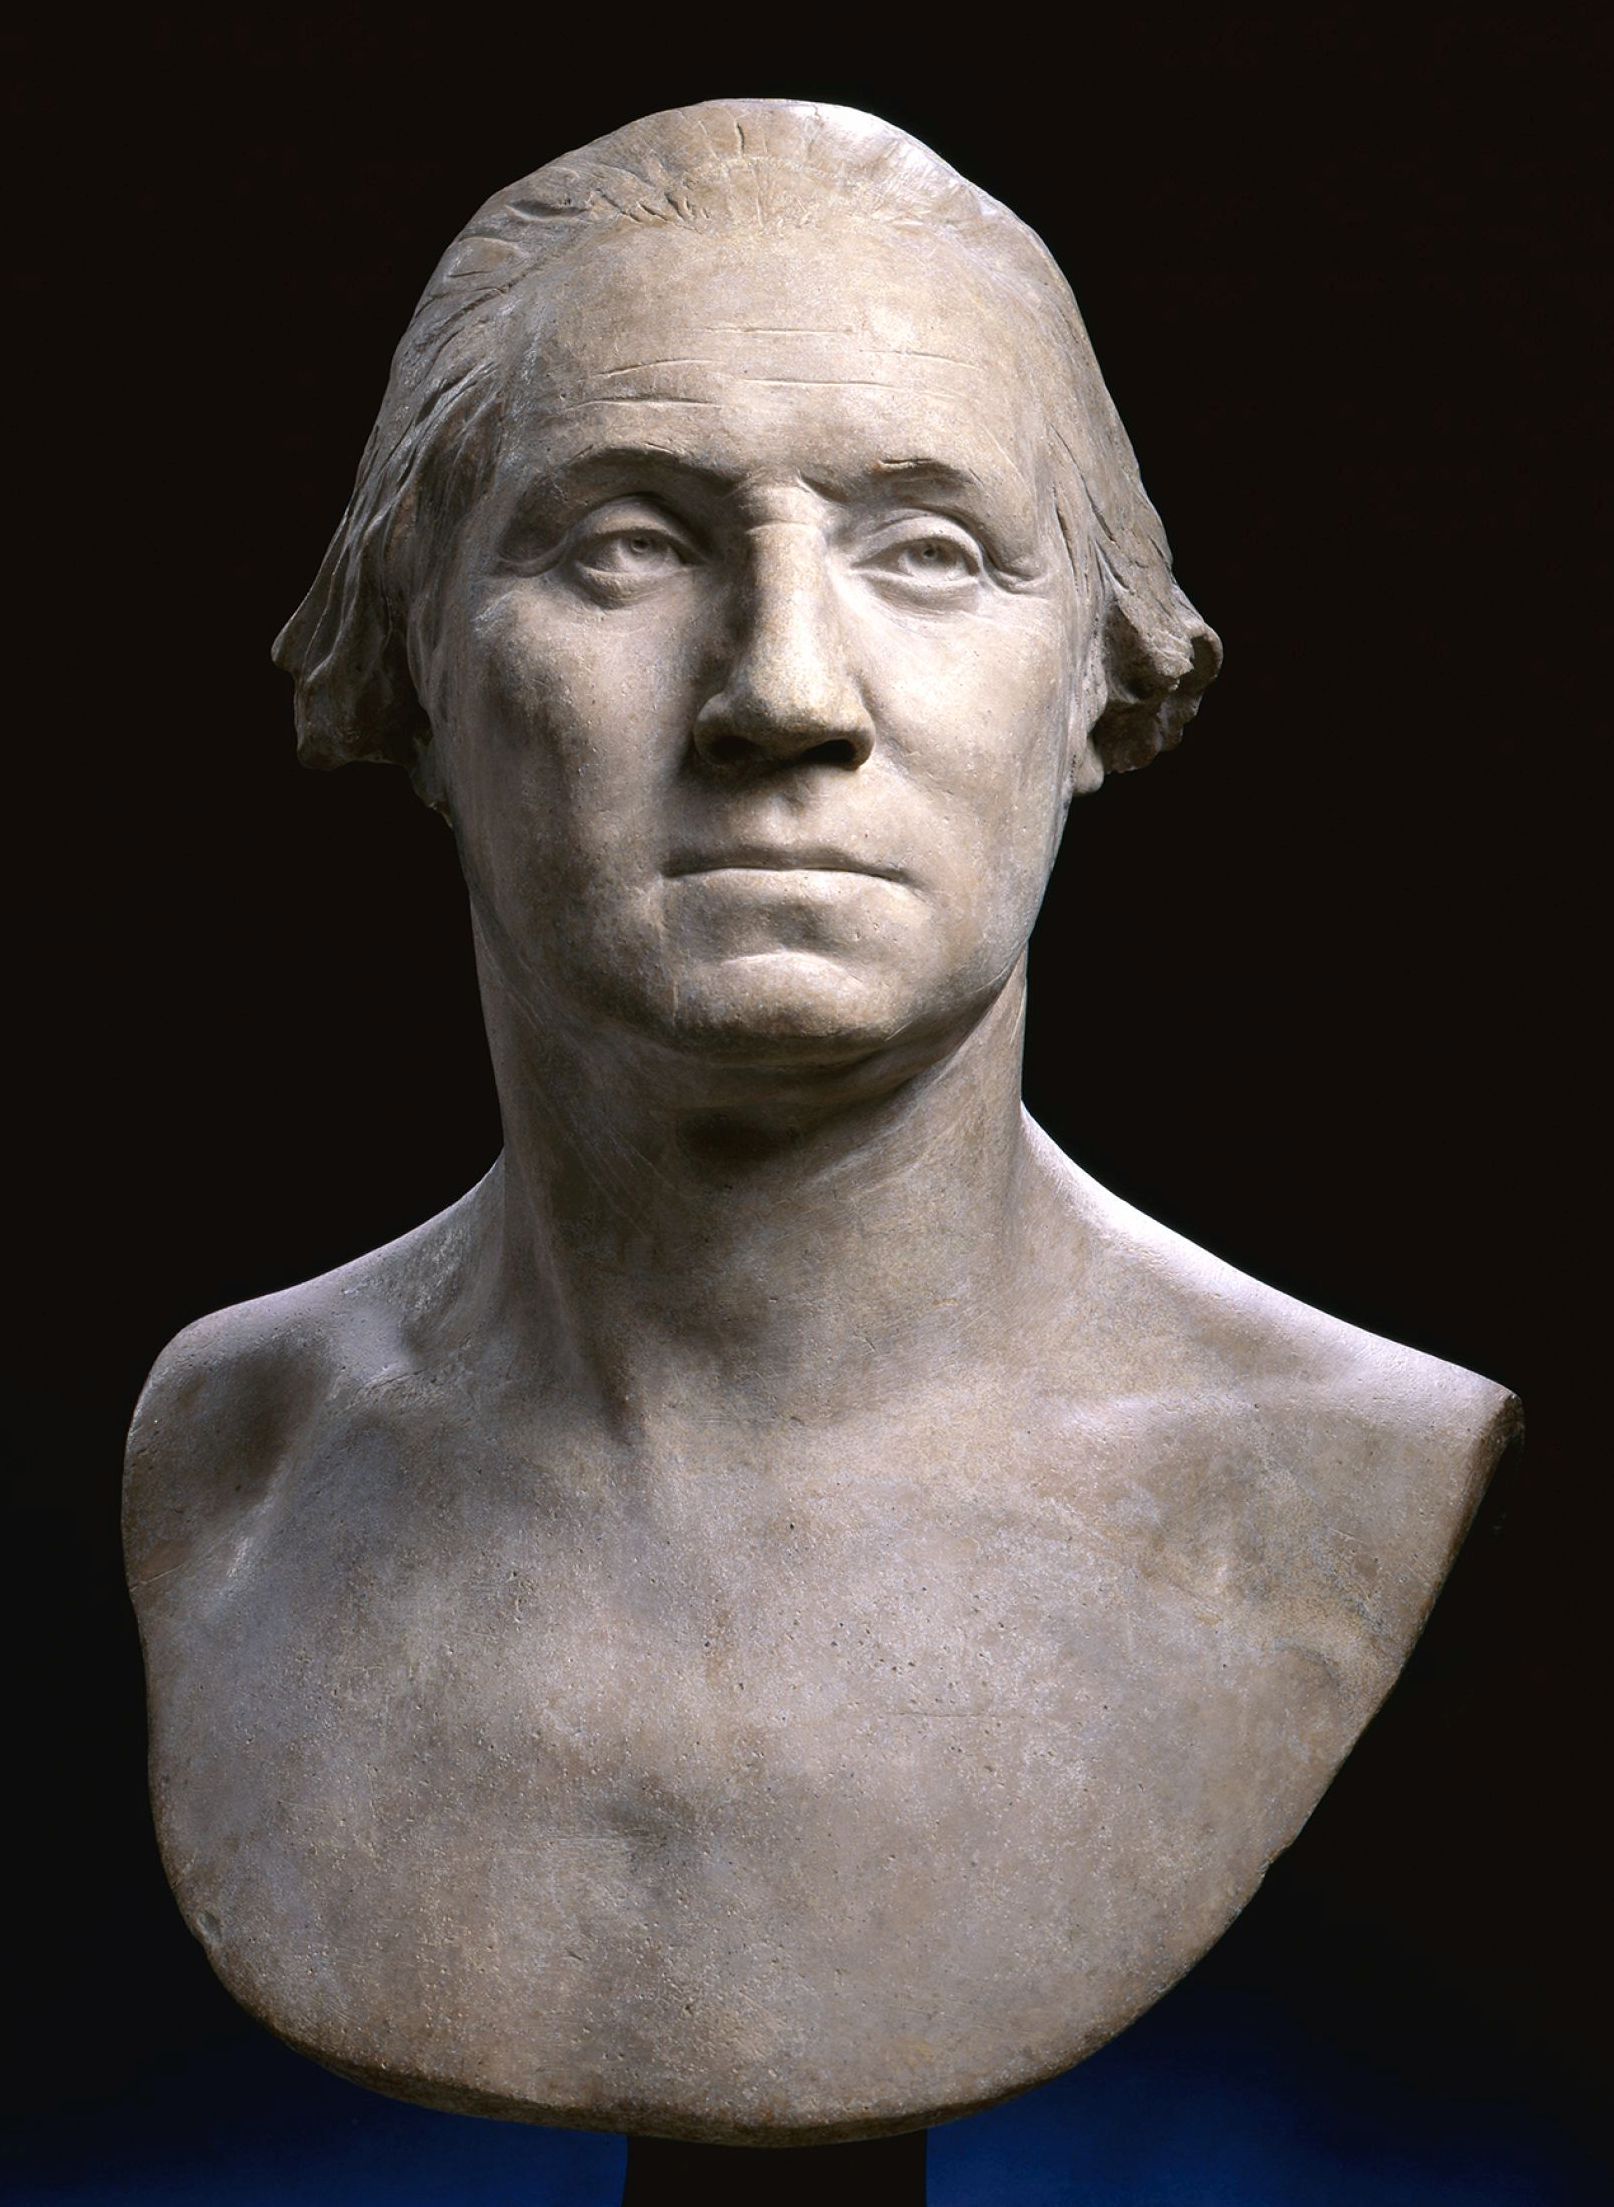 the French sculpter Houdon created a plaster bust from life of George Washington.